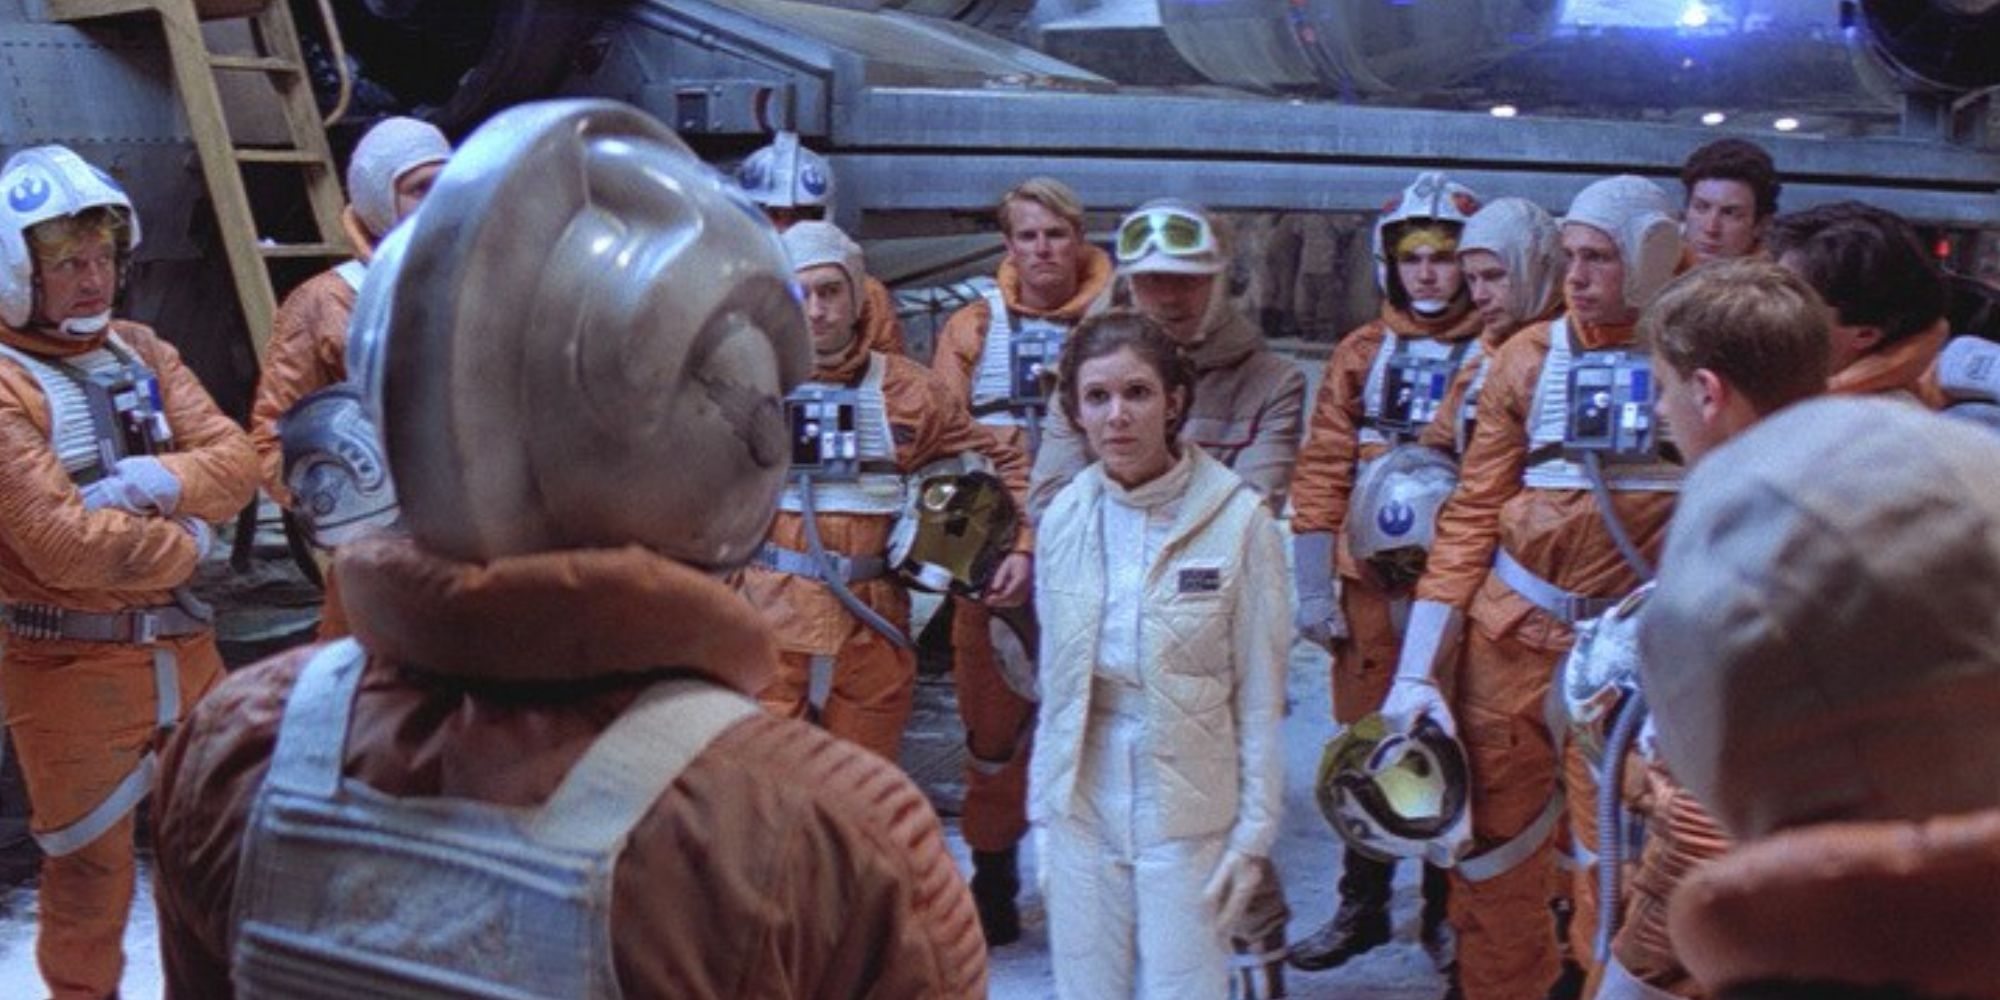 Carrie Fisher as Princess Leia standing among the X-Wing pilots in Star Wars: Episode V - The Empire Strikes Back